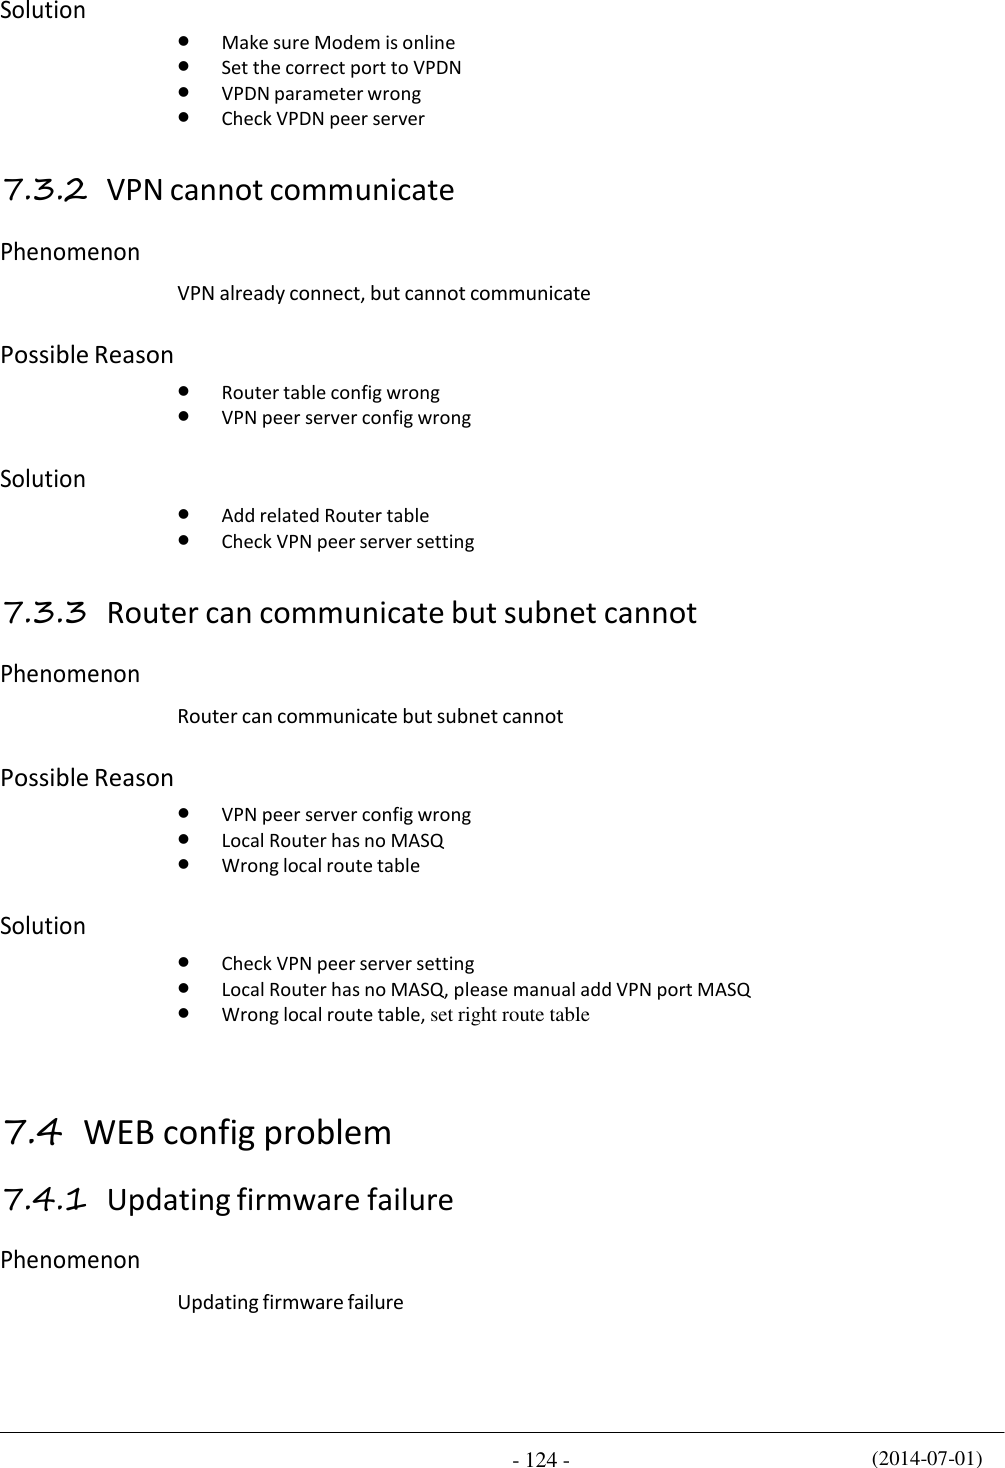 (2014-07-01) - 124 -    Solution     Make sure Modem is online  Set the correct port to VPDN  VPDN parameter wrong  Check VPDN peer server  7.3.2 VPN cannot communicate  Phenomenon   VPN already connect, but cannot communicate  Possible Reason    Router table config wrong  VPN peer server config wrong  Solution    Add related Router table  Check VPN peer server setting  7.3.3 Router can communicate but subnet cannot  Phenomenon   Router can communicate but subnet cannot  Possible Reason    VPN peer server config wrong  Local Router has no MASQ  Wrong local route table  Solution    Check VPN peer server setting  Local Router has no MASQ, please manual add VPN port MASQ  Wrong local route table, set right route table    7.4 WEB config problem  7.4.1 Updating firmware failure  Phenomenon   Updating firmware failure 